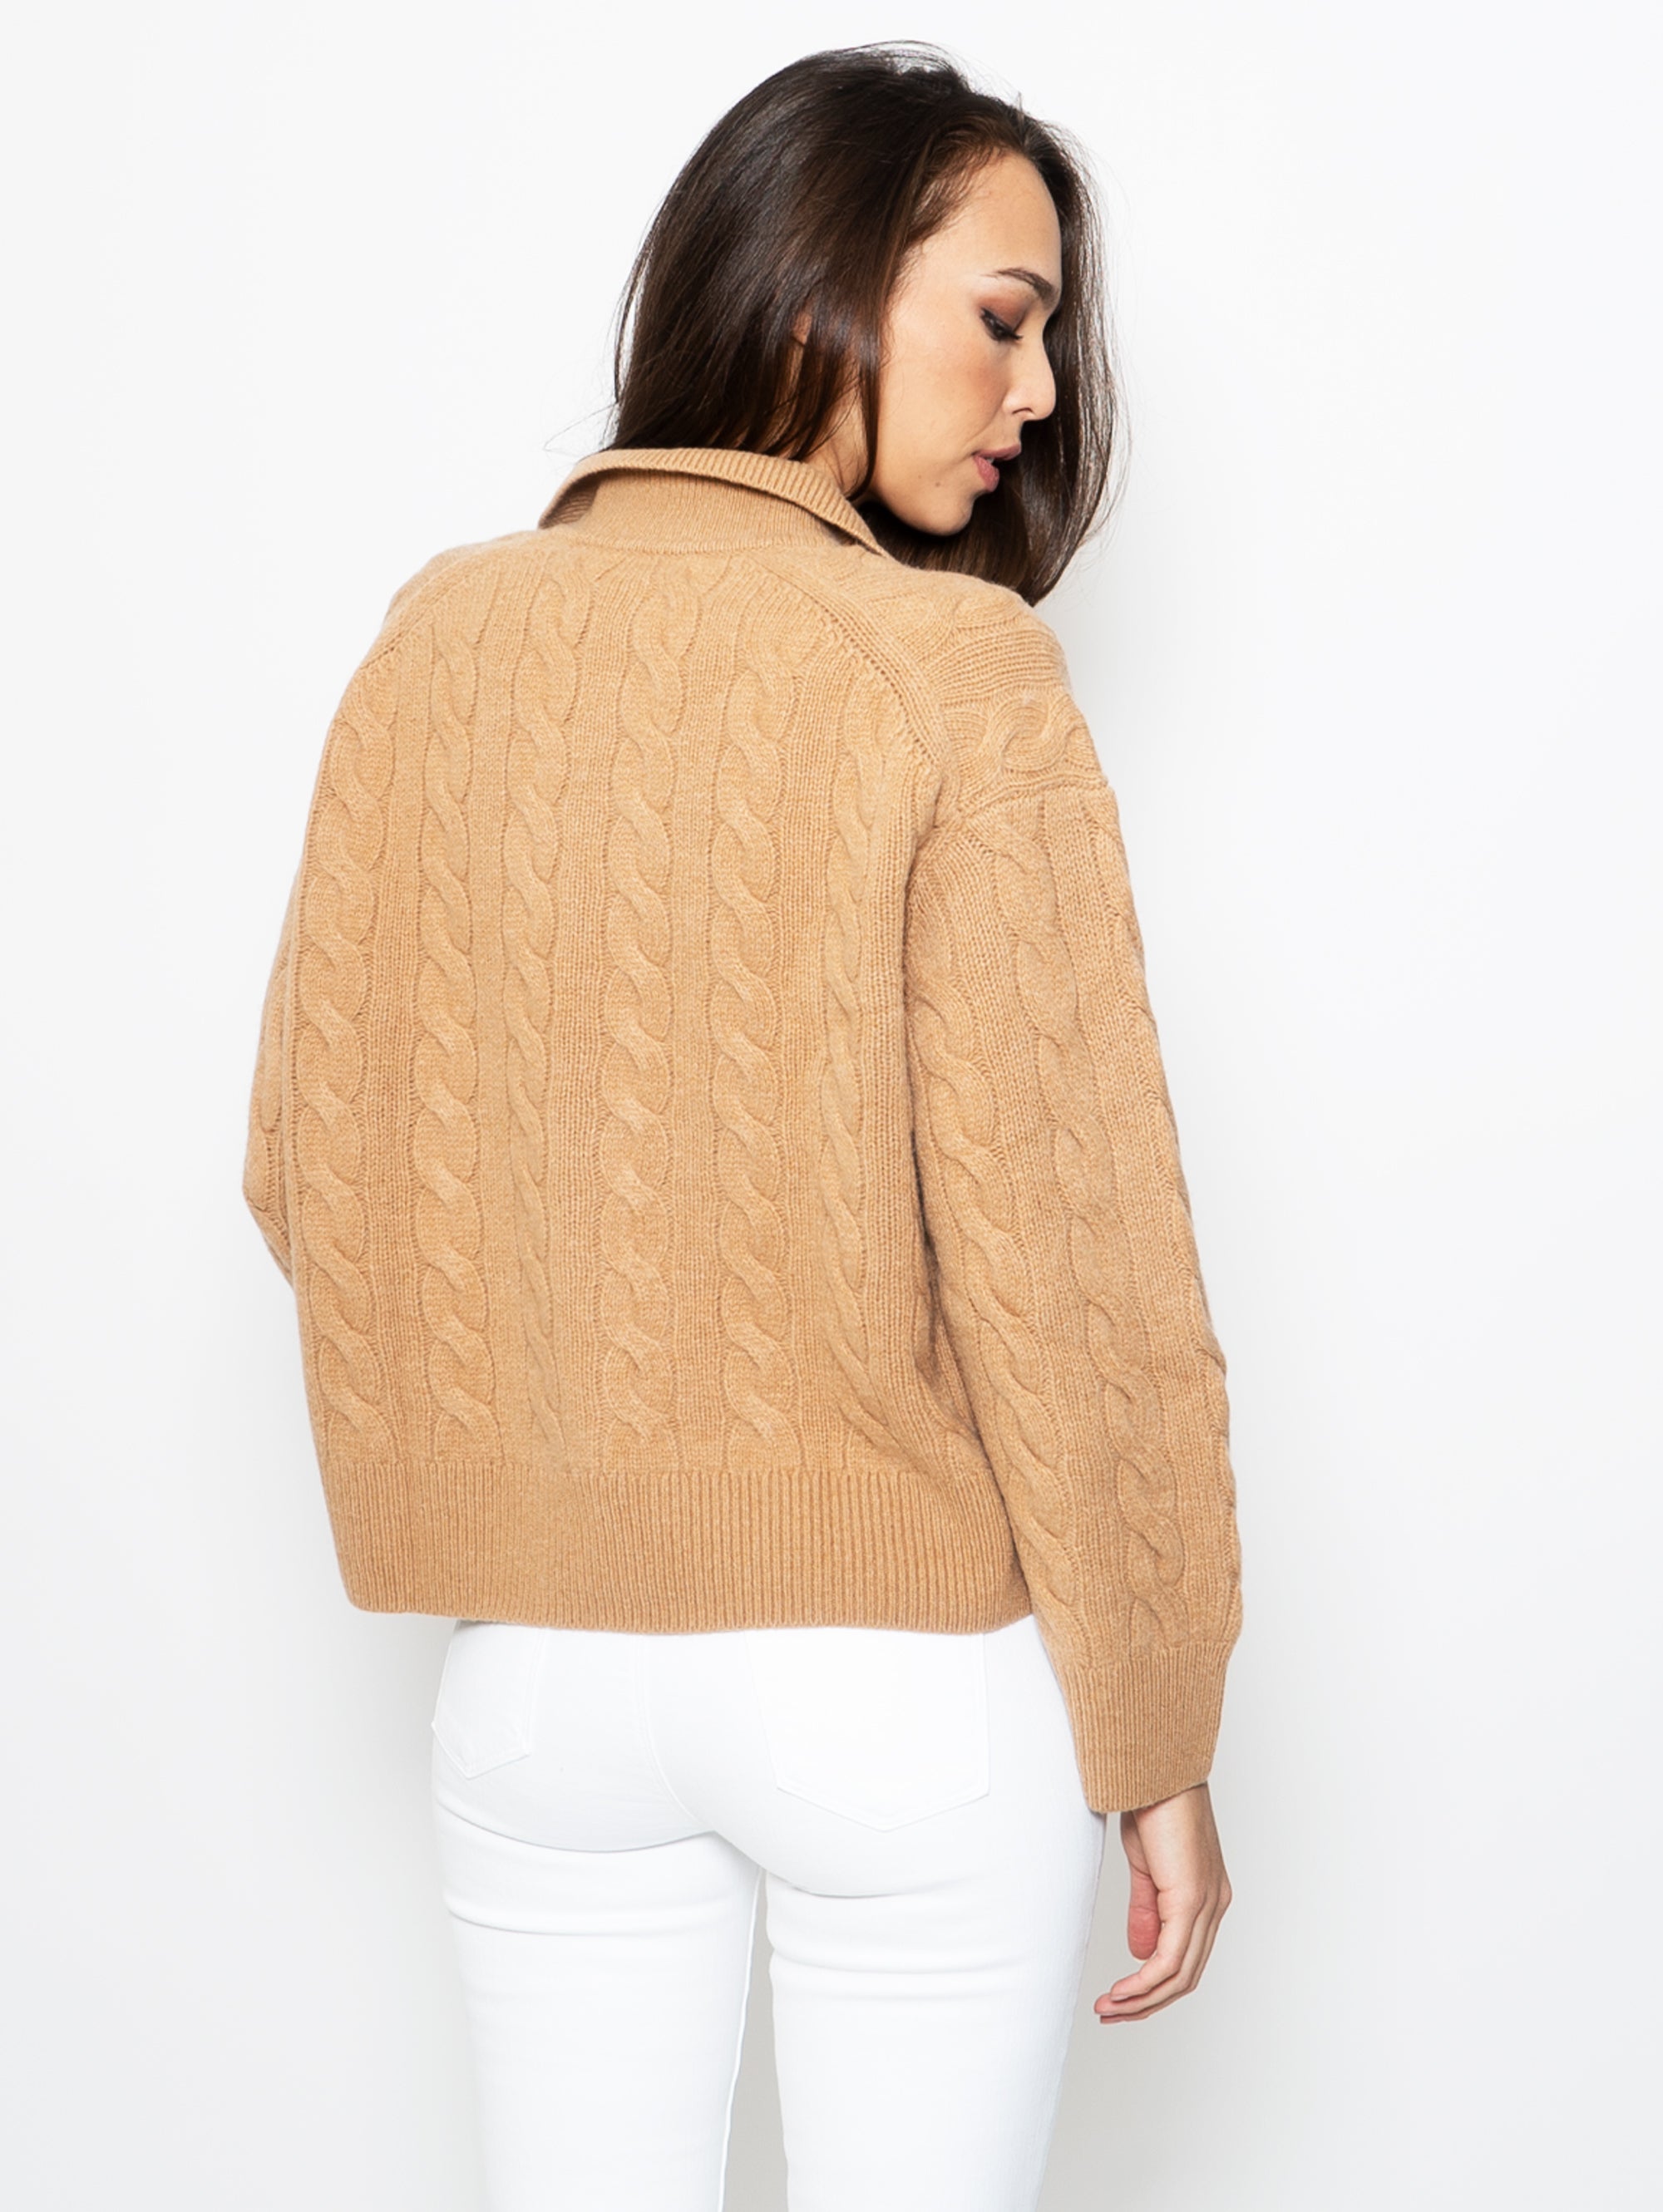 Braided Sweater with Camel Polo Neck